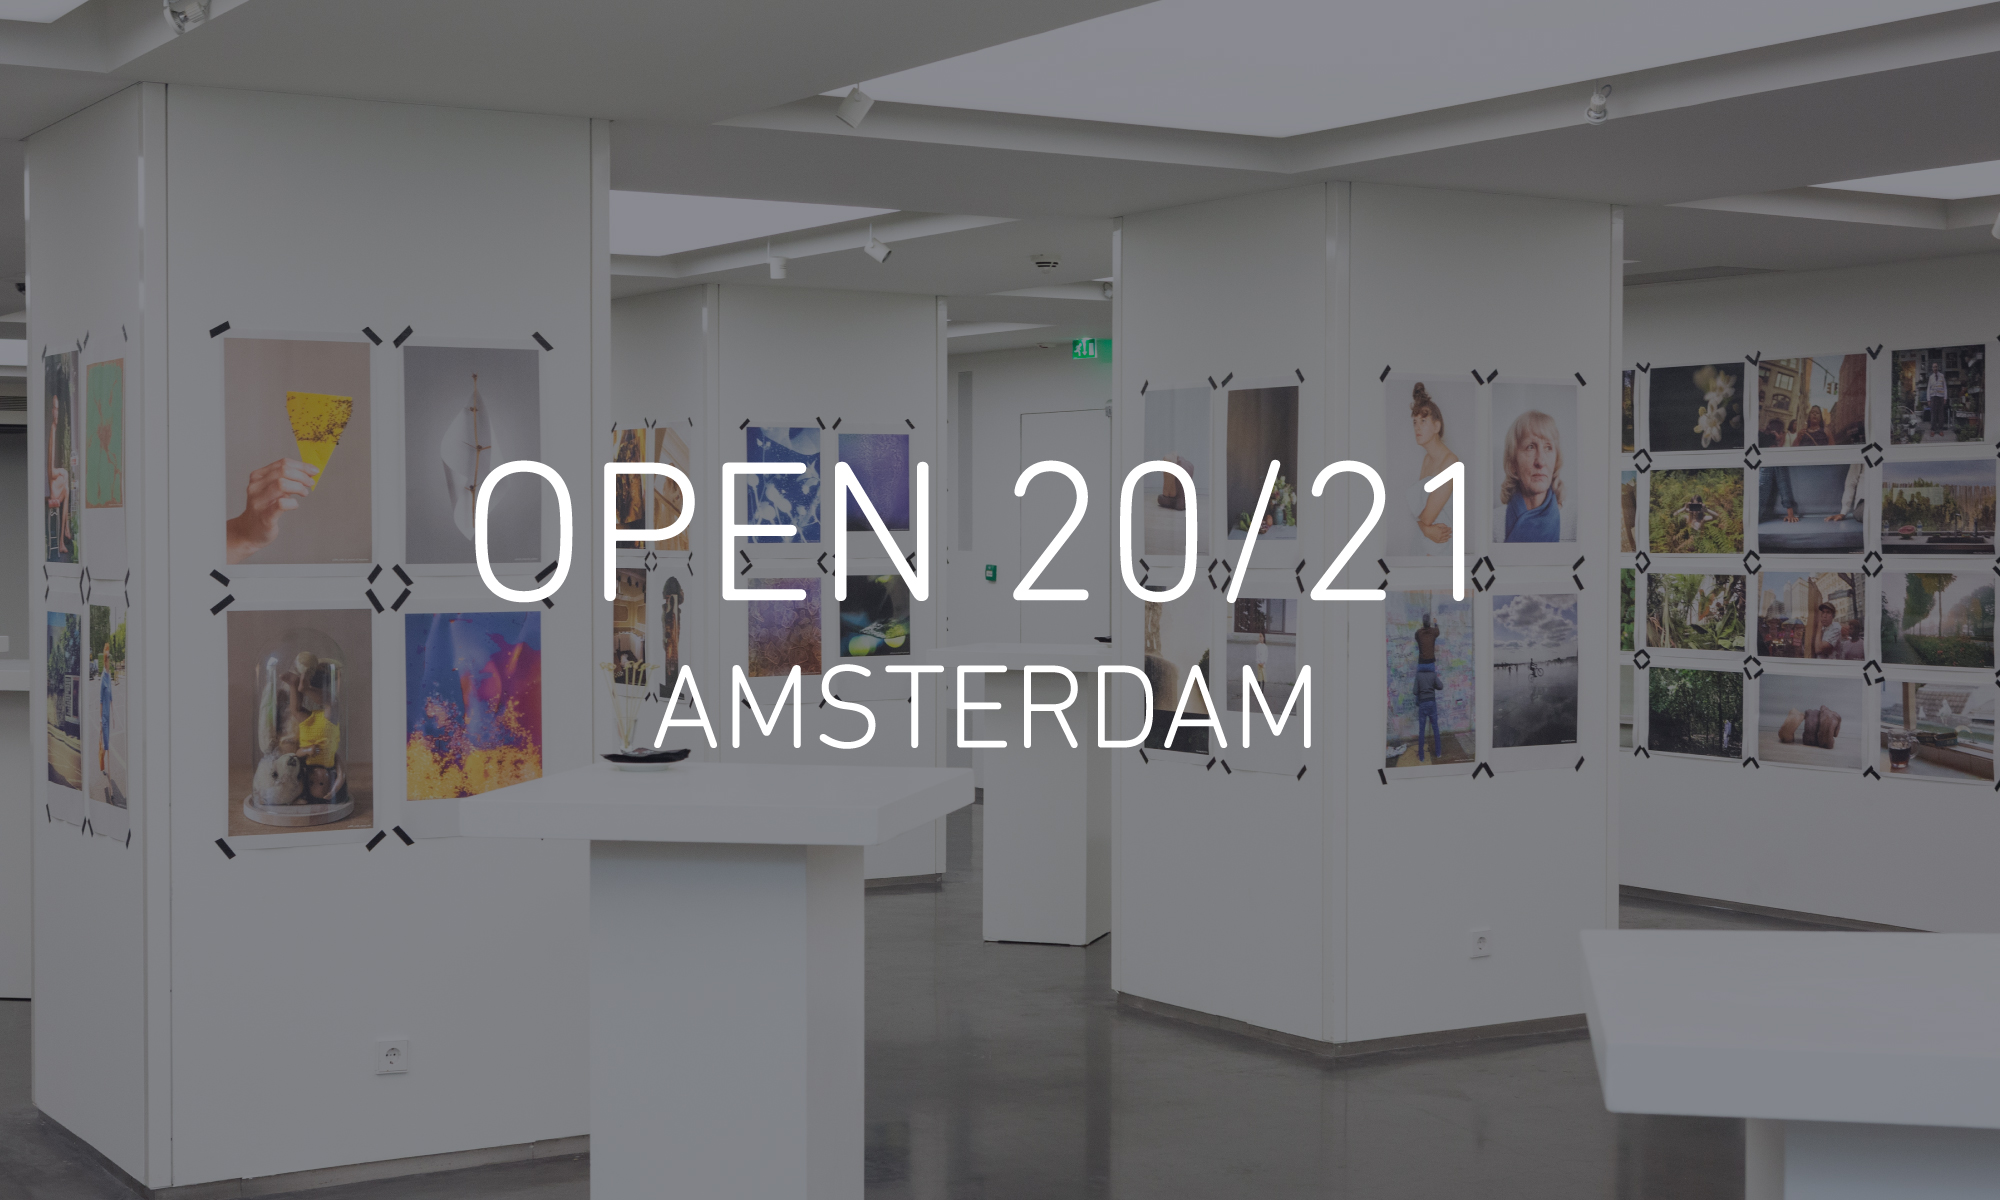 Image of the OPEN 2018 Amsterdam exhibition, with Newspaper Club prints taped to walls and pillars at 5&33 Gallery, with text reading 'OPEN 20/21 AMSTERDAM' in the centre